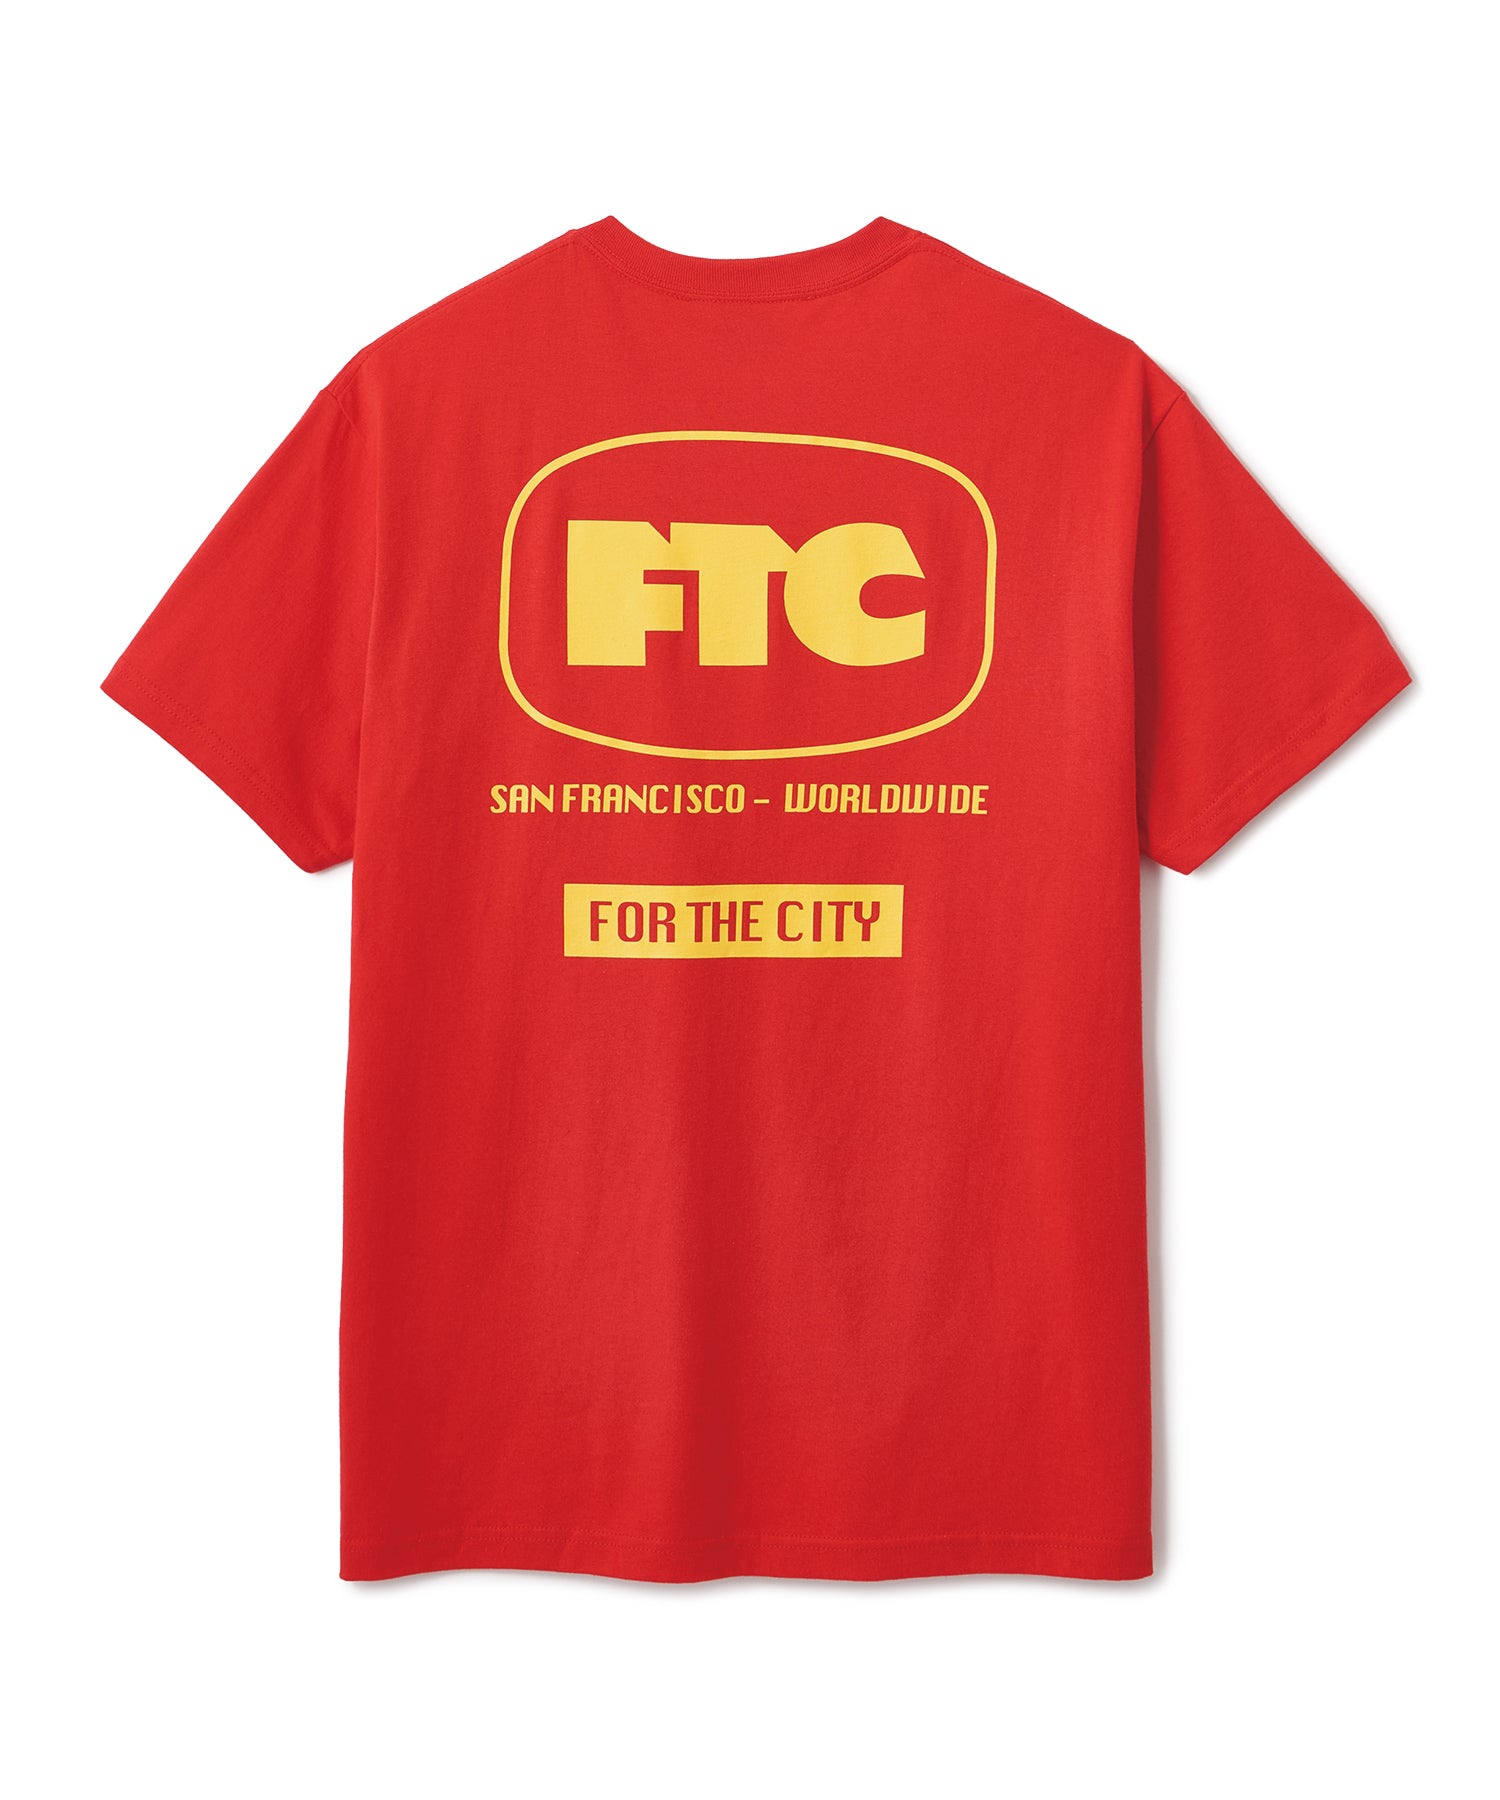 FTC PRODUCTIONS TEE – FTC SKATEBOARDING